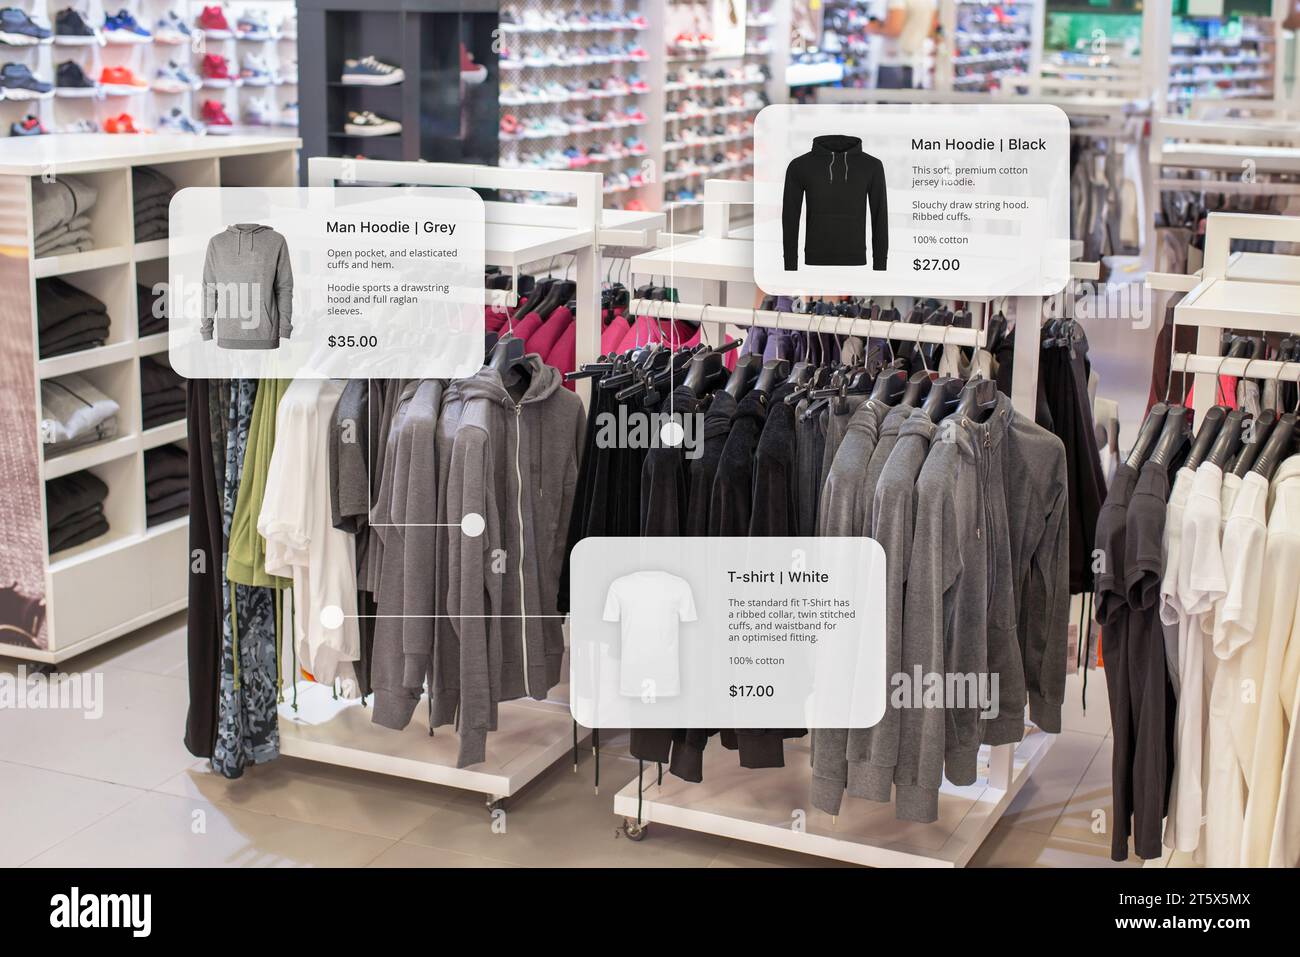 Innovation at the clothes shop with an intelligent shopping system displaying garment features and prices Stock Photo